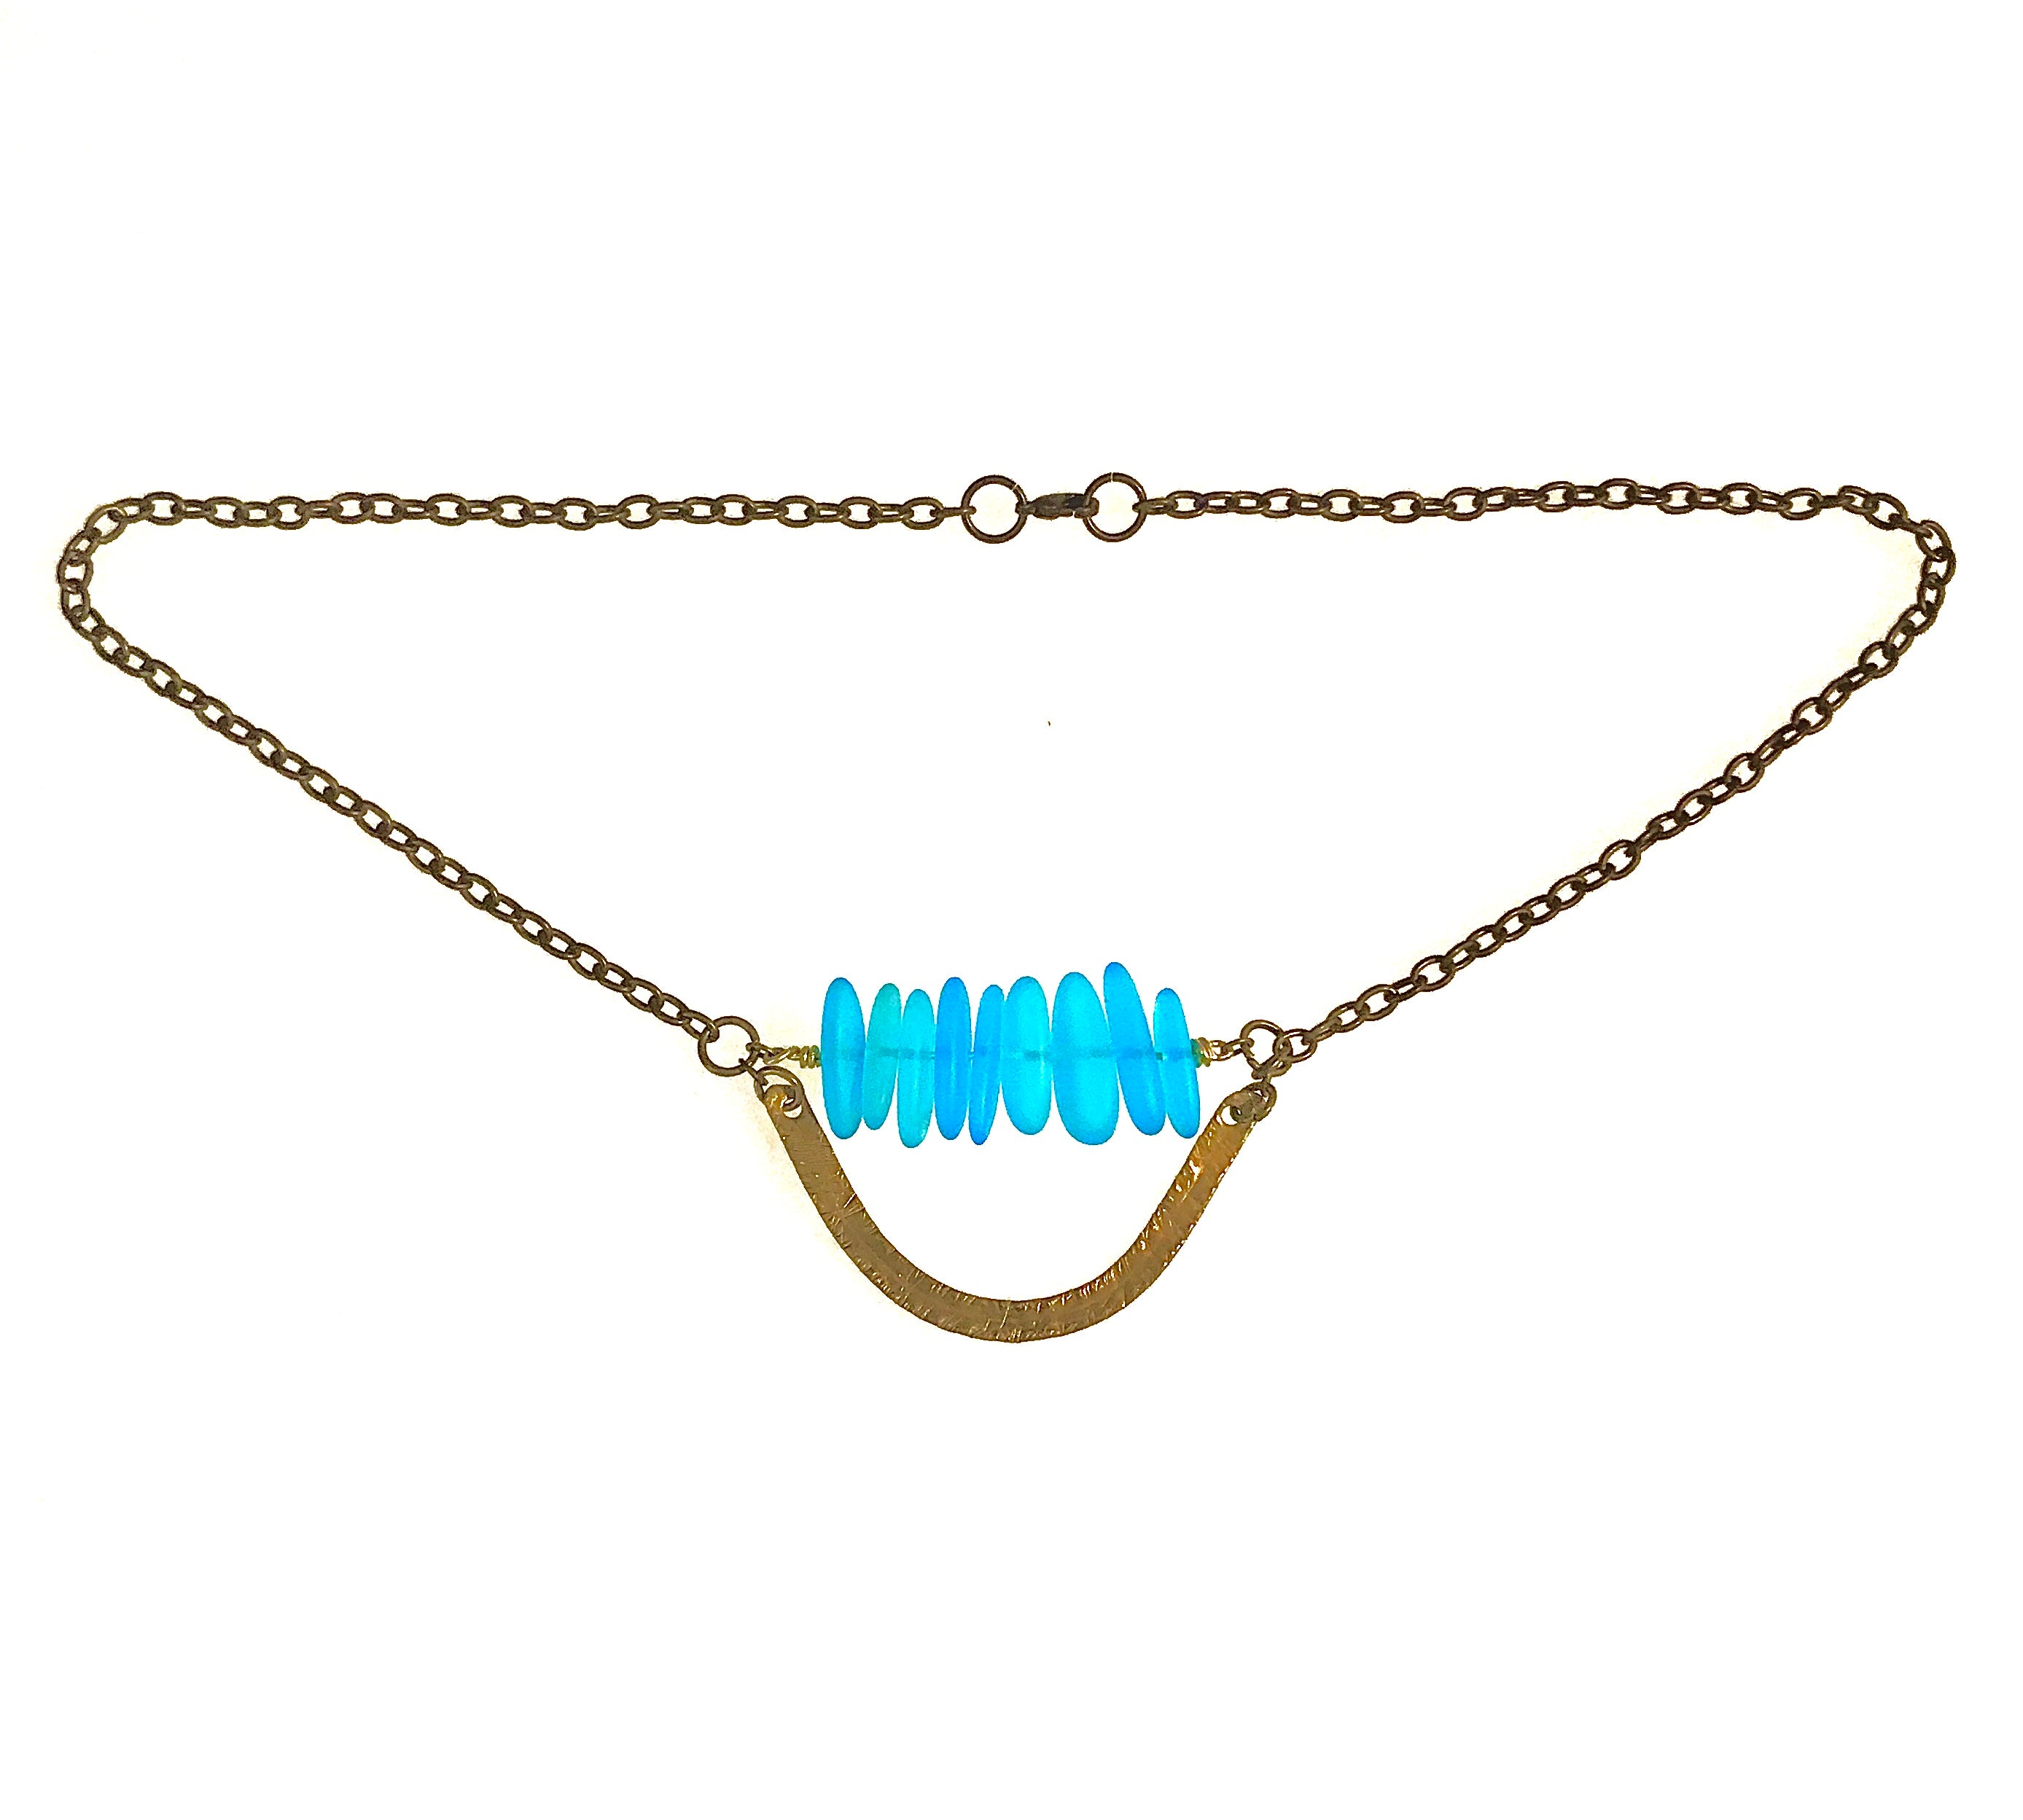 Water's edge necklace